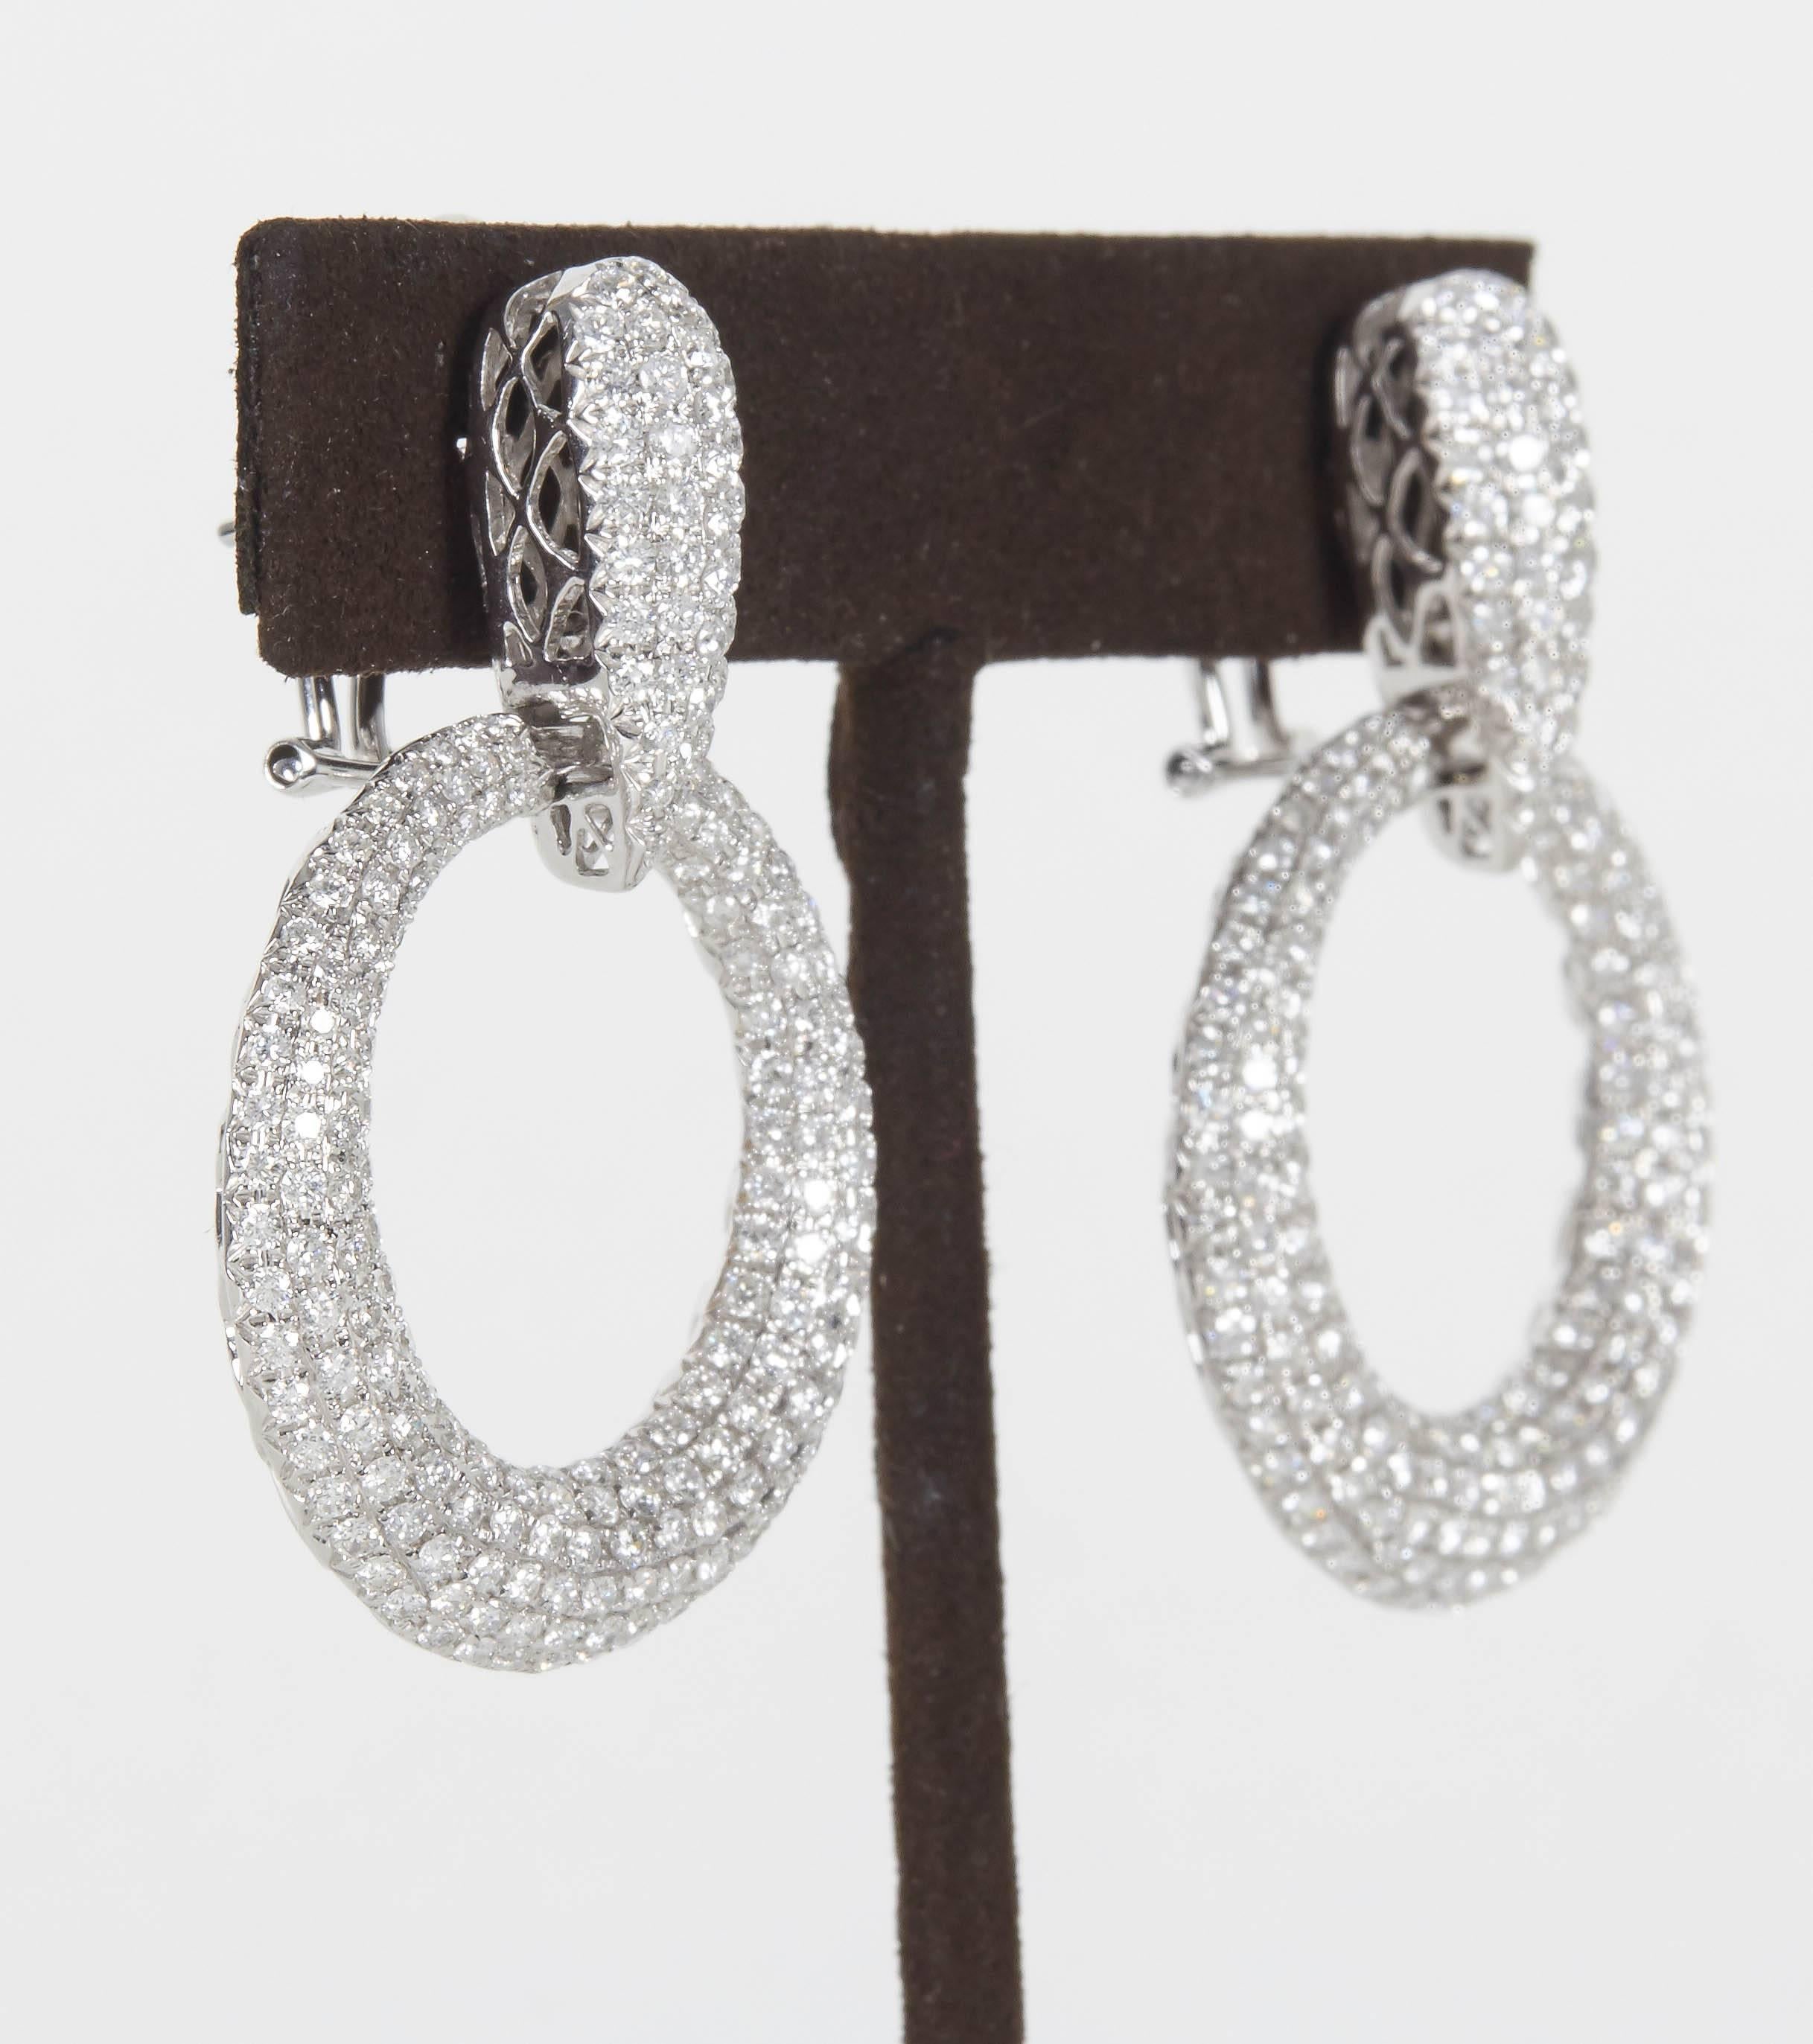 

A stunning pair of fashionable diamond earrings.

5.22 carats of sparkle! 

The diamonds are F/G color and VS clarity set in 18k white gold.

Just under approximately 1 3/4 inches from top to bottom, 1 1/4 inches at its widest point. 